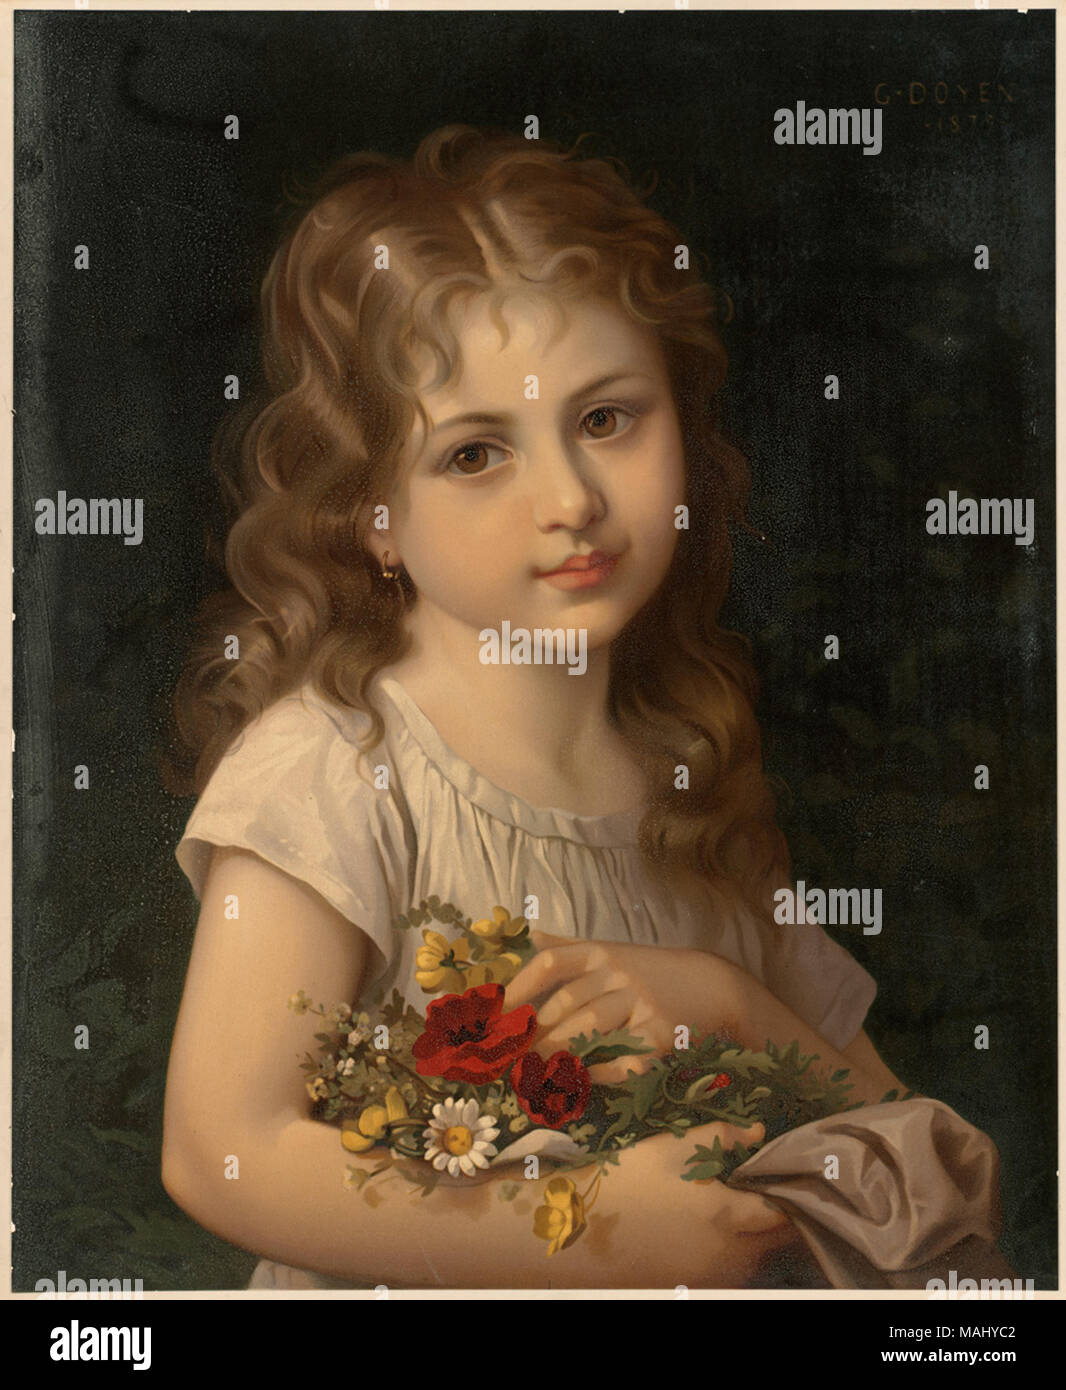 07 11 000657 Title: Happy Childhood Creator/Contributor: Doyen, Gustave, b. 1837 (artist); L. Prang & Co. (publisher) Date issued: 1861-1897 (approximate)  Physical description note: Published state Genre: Chromolithographs; Portrait prints Location: Boston Public Library,    on 2011-08-07: Camera: Sinar AG Sinarback 54 FW, Sinar m Stock Photo